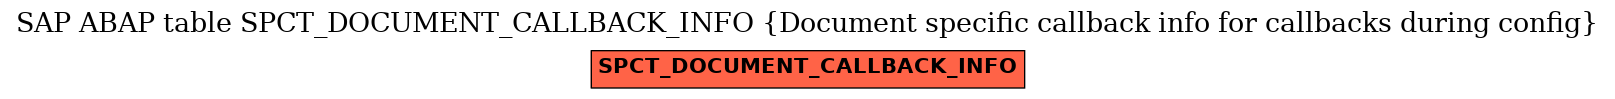 E-R Diagram for table SPCT_DOCUMENT_CALLBACK_INFO (Document specific callback info for callbacks during config)